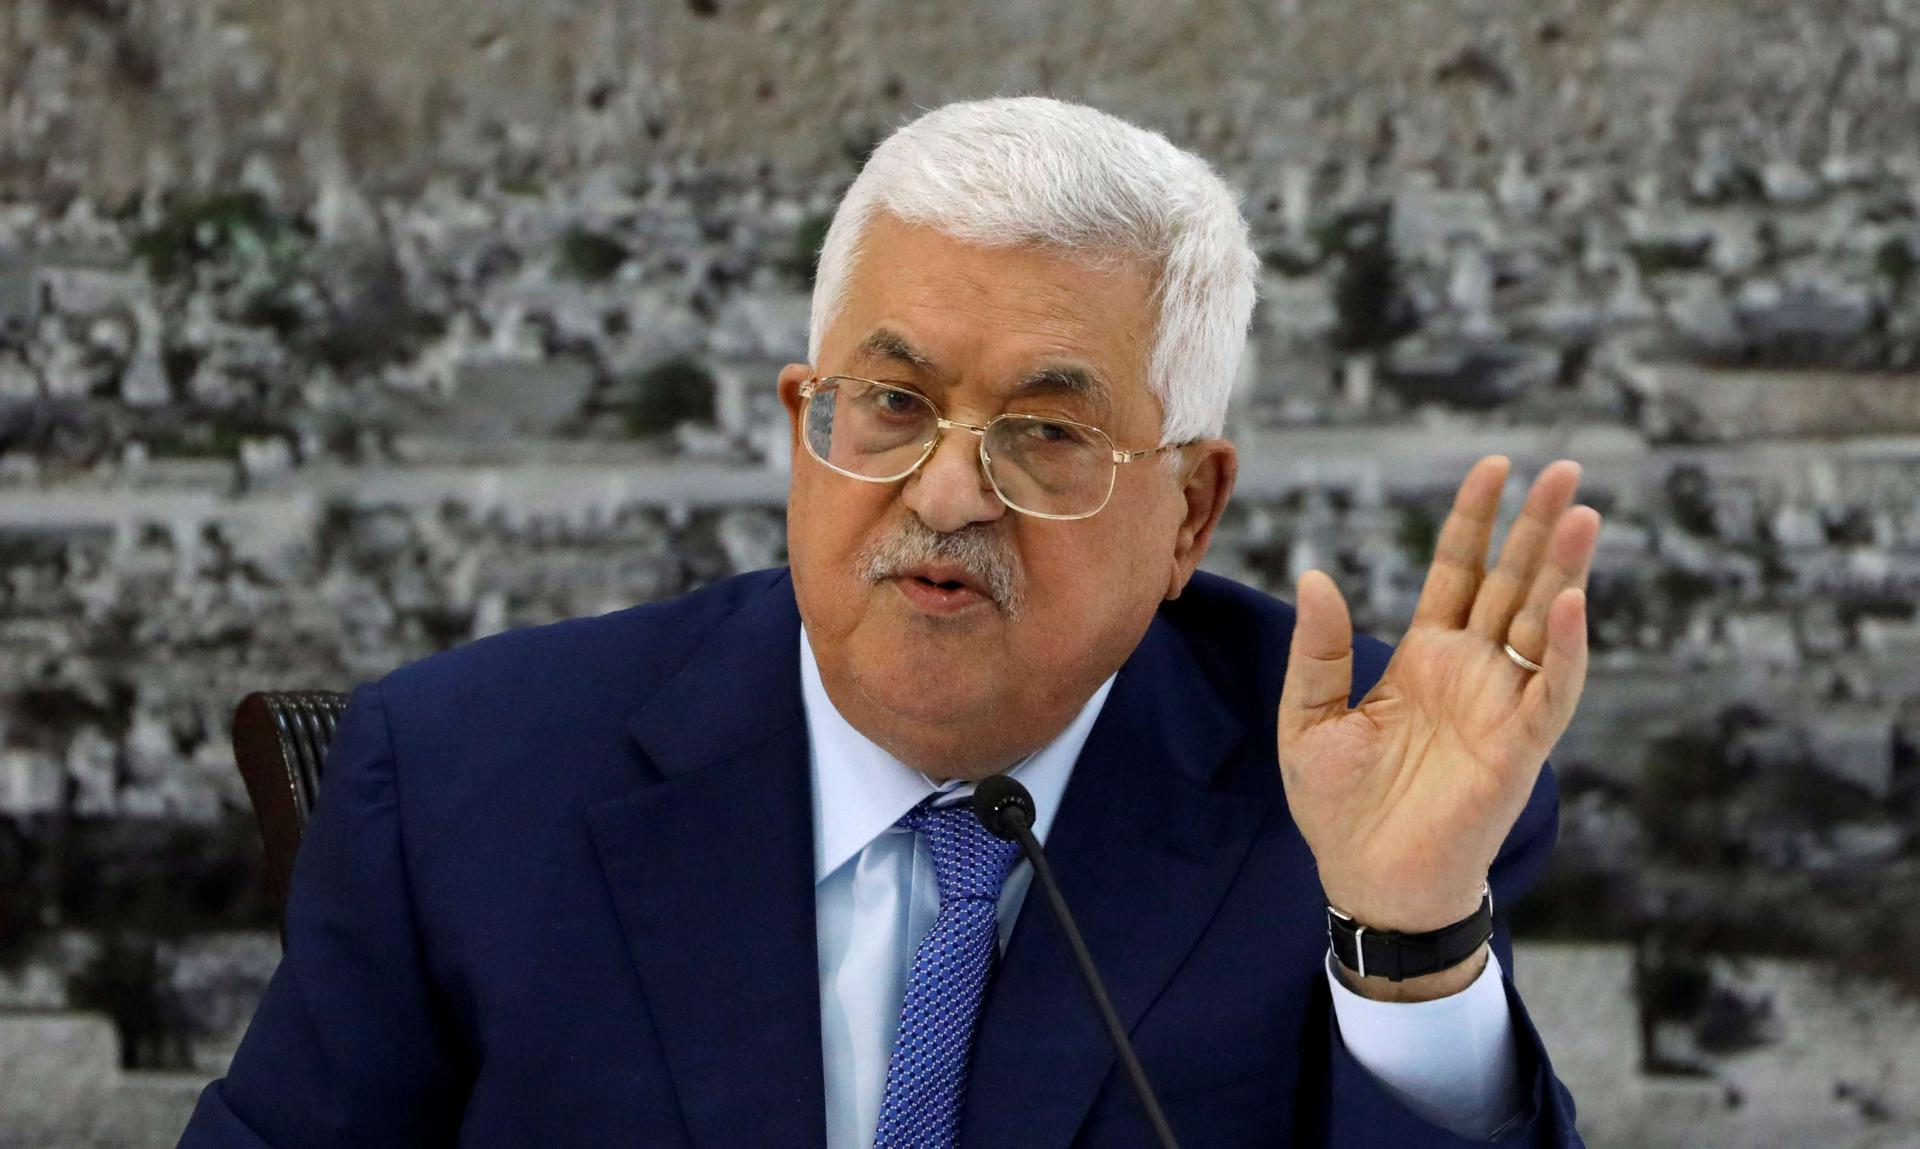 Abbas said he would not accept partial payments of taxes collected by Israel